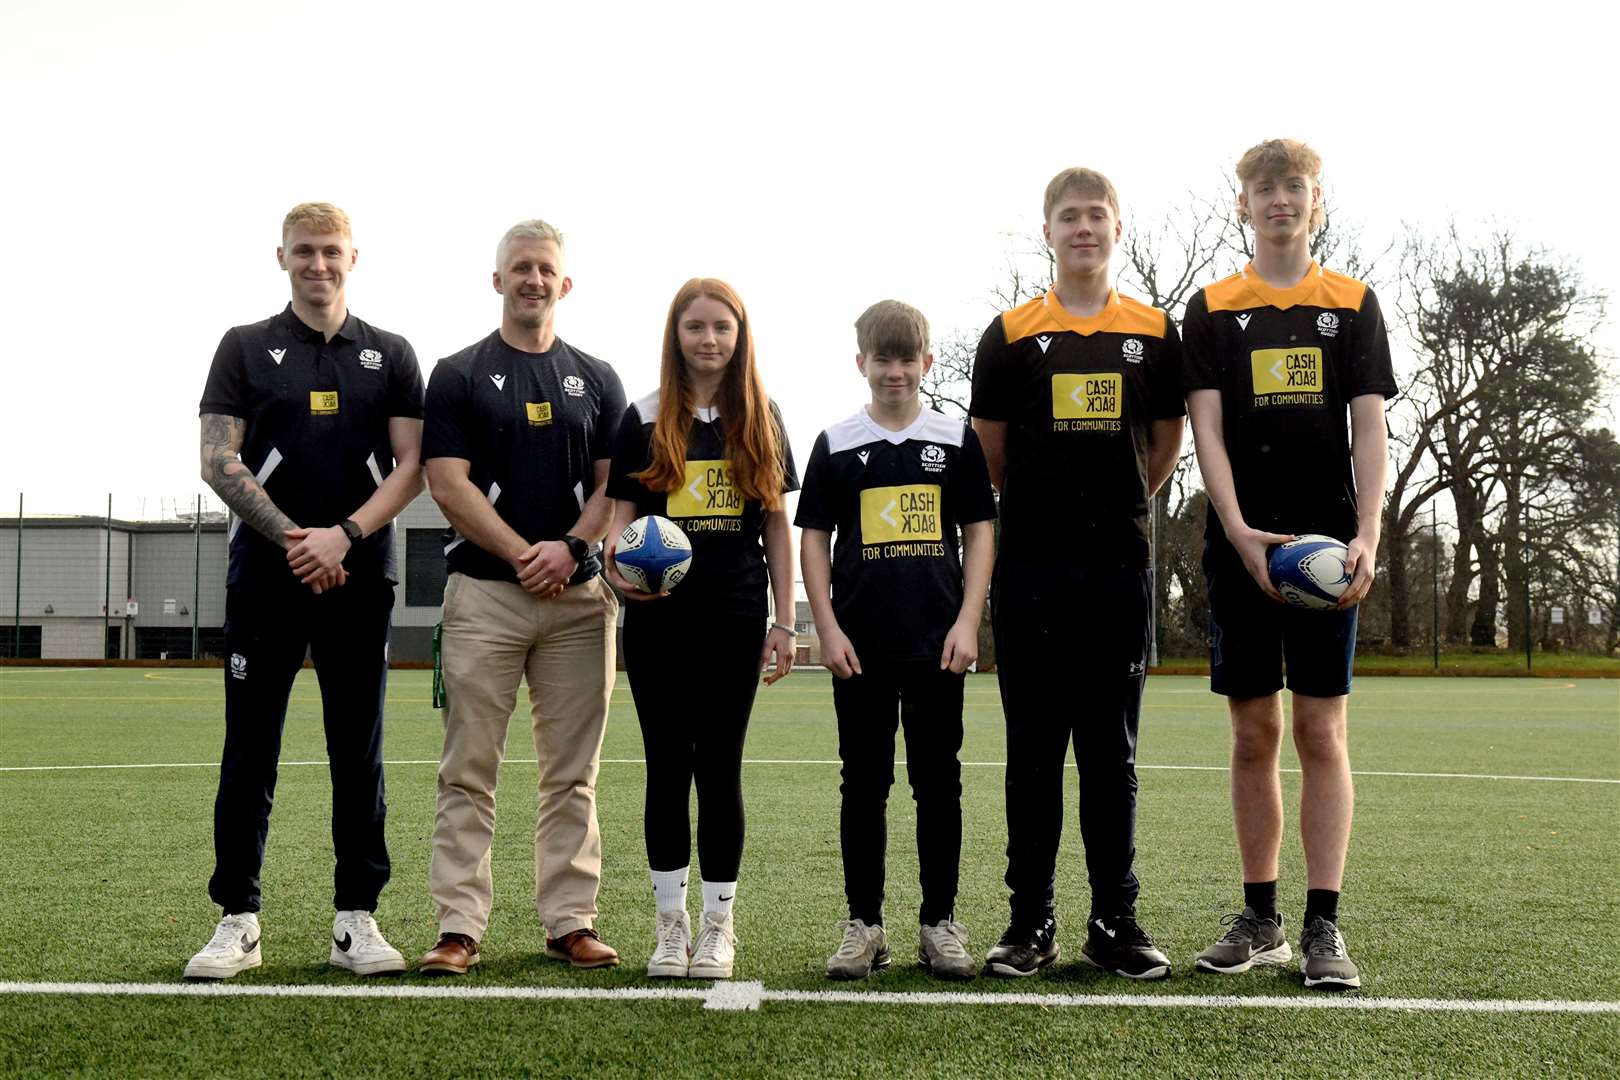 Michael McClenaghan, Ross Sutherland Rugby Club Cashback officer, Tom McGowan, headmaster, Jessica Peoples, Jack Noble, Eryk Buchwalk and Finn Kenny, pupils. Picture: James Mackenzie.